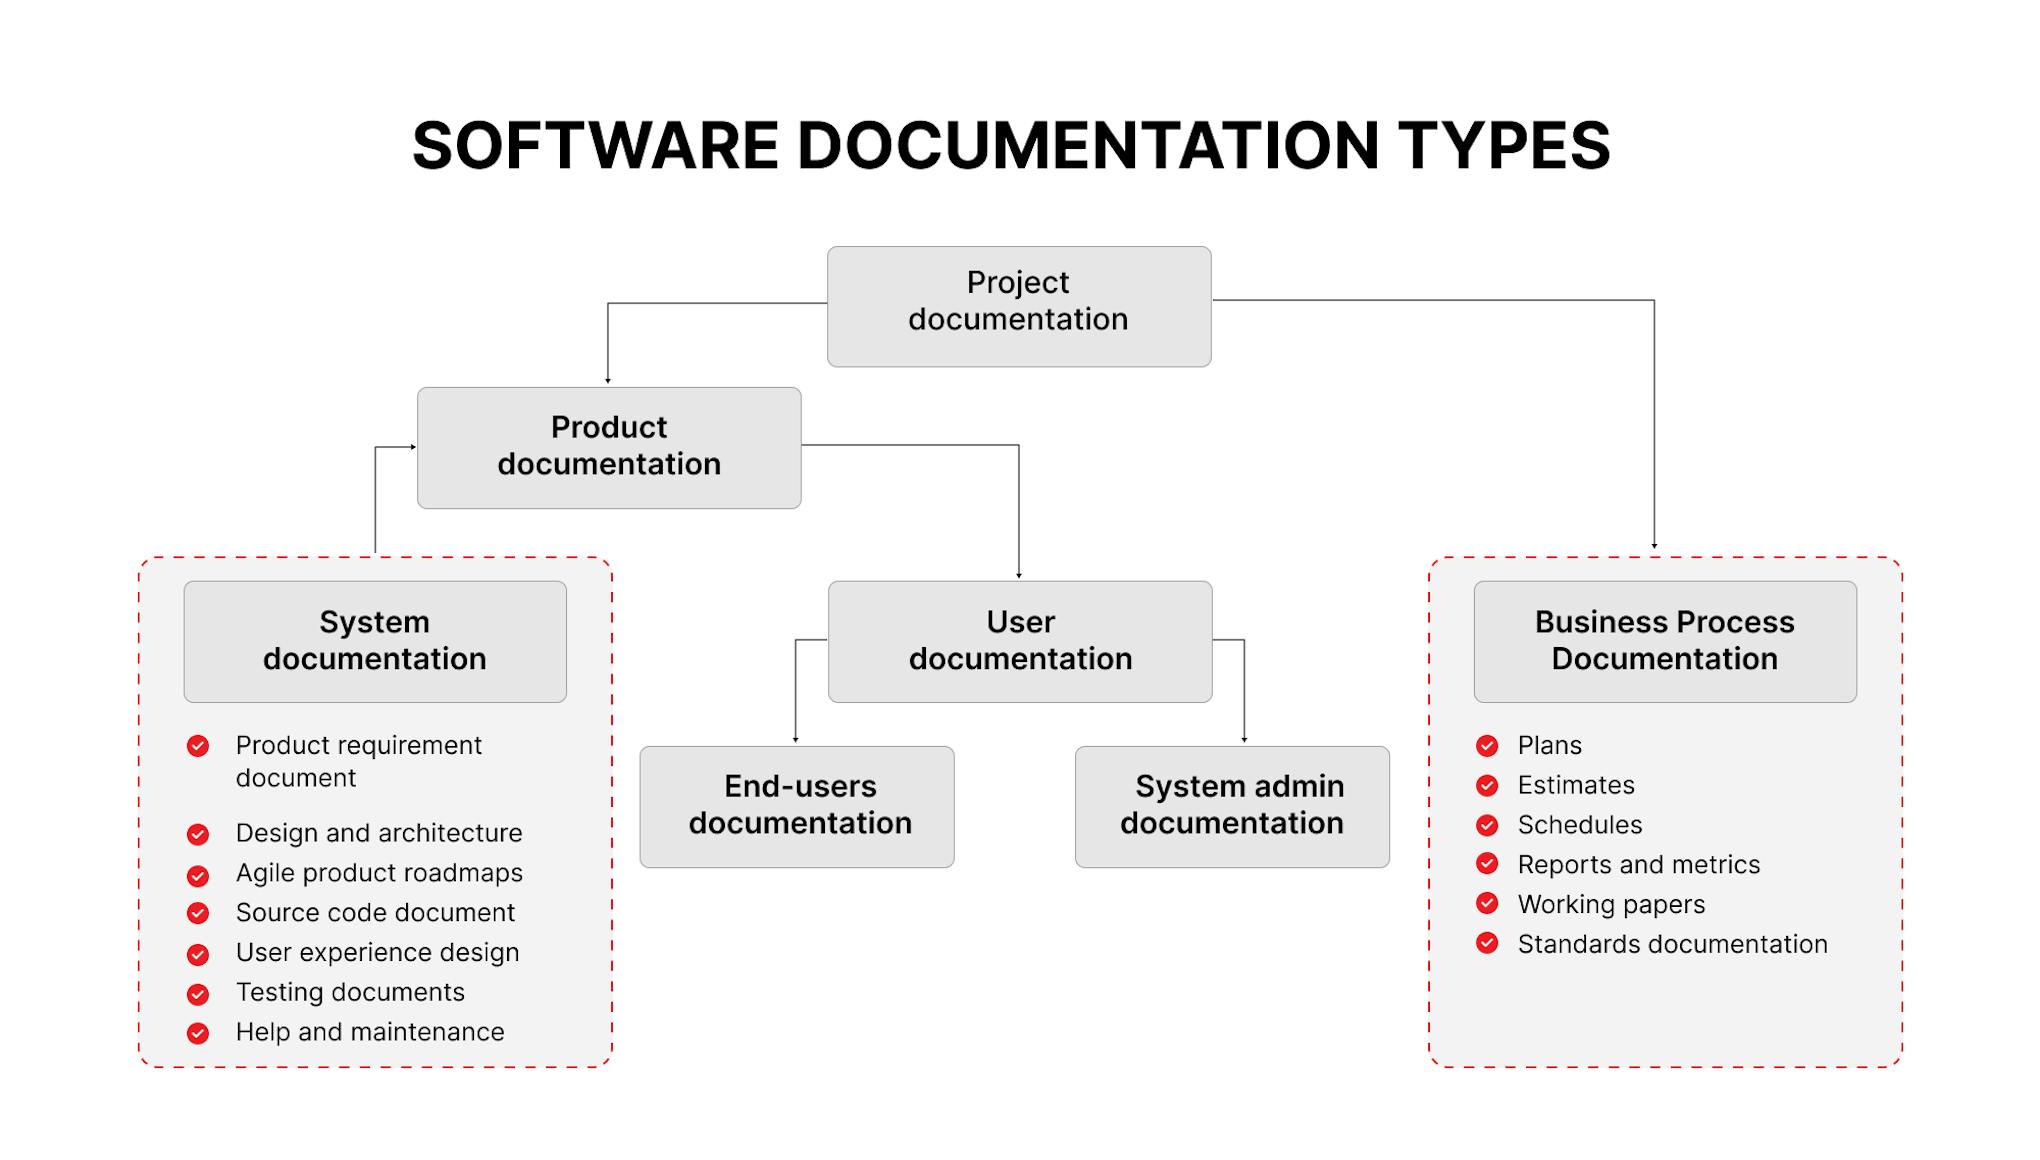 Types of Software Documentation